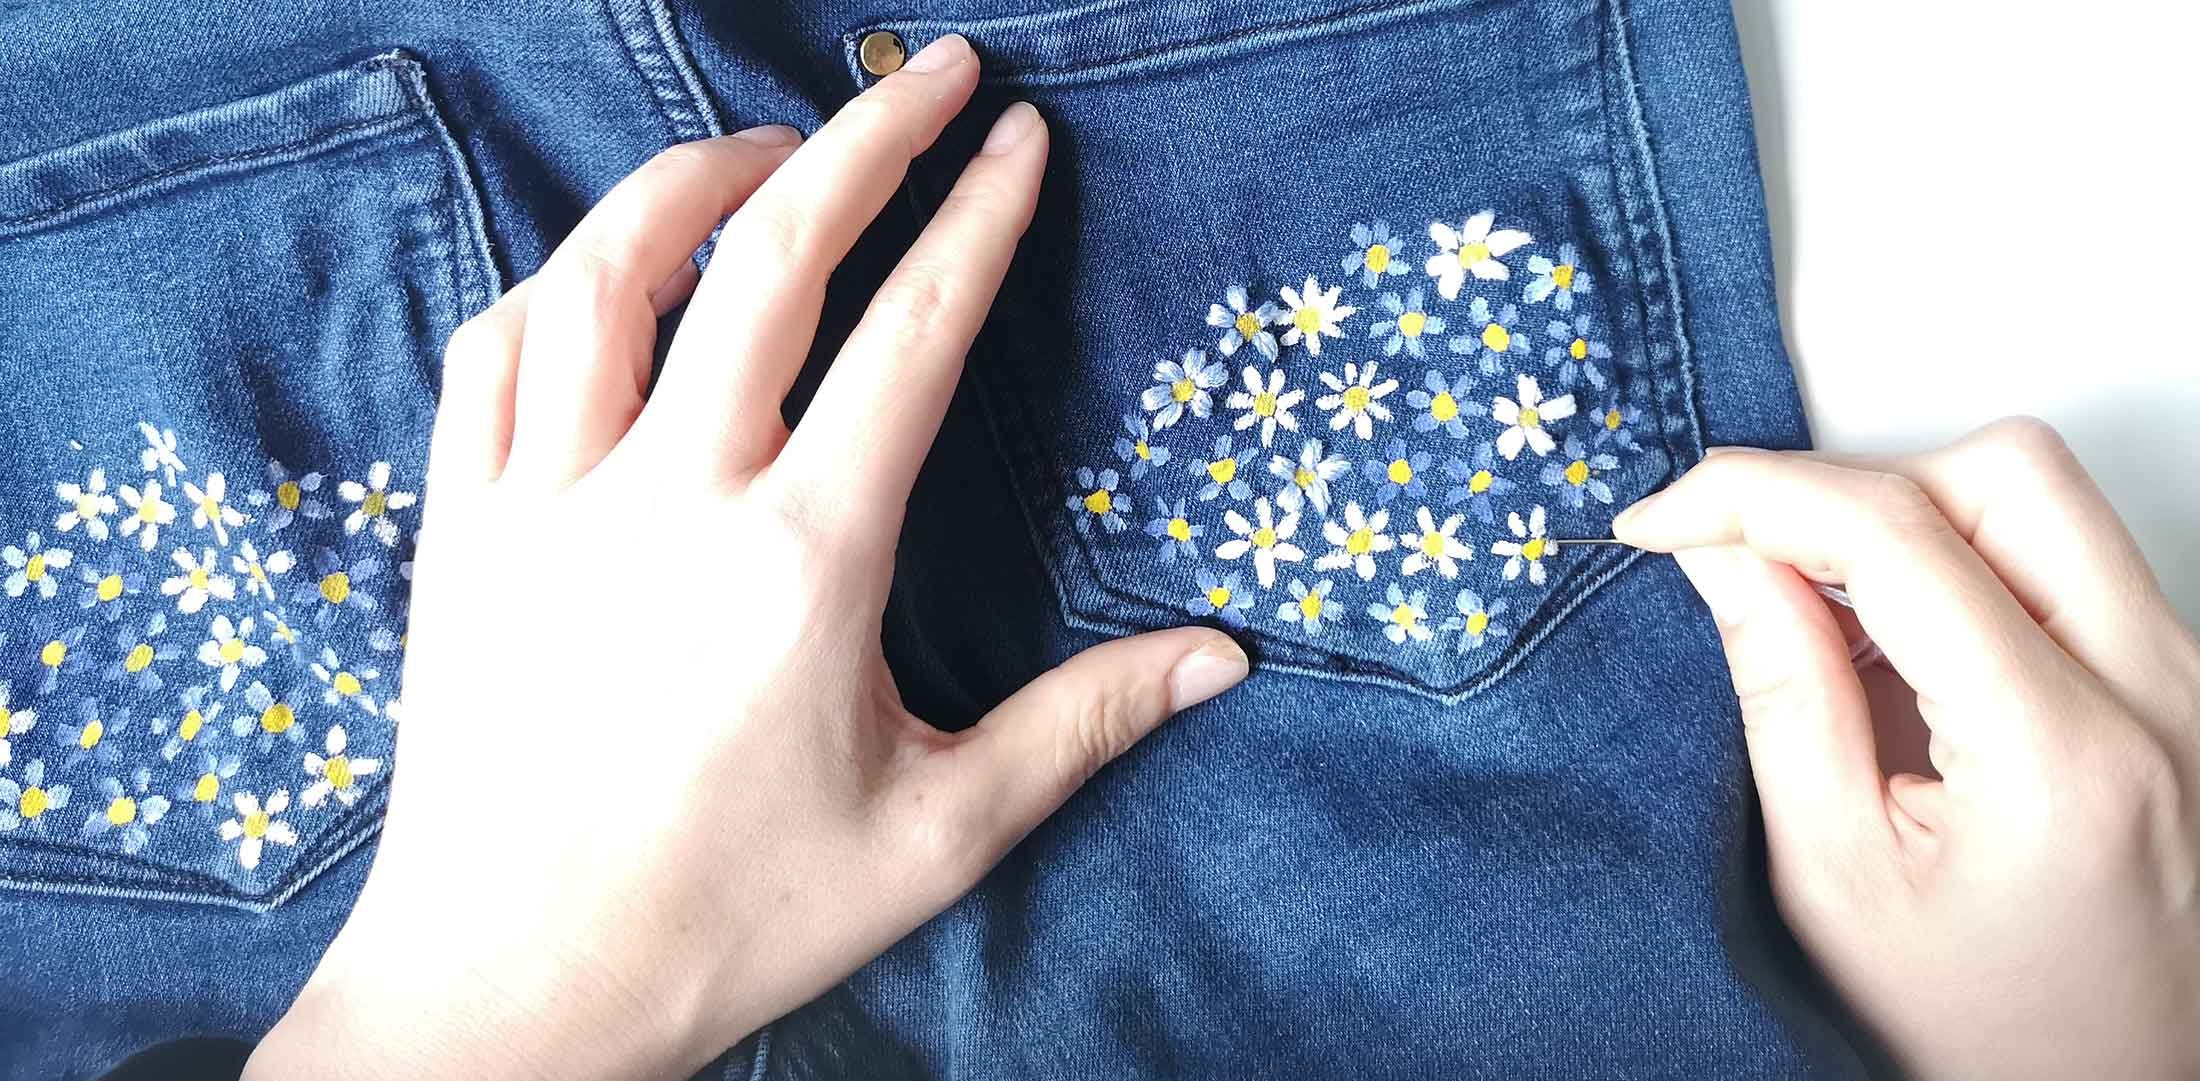 embroidered flowers on jeans